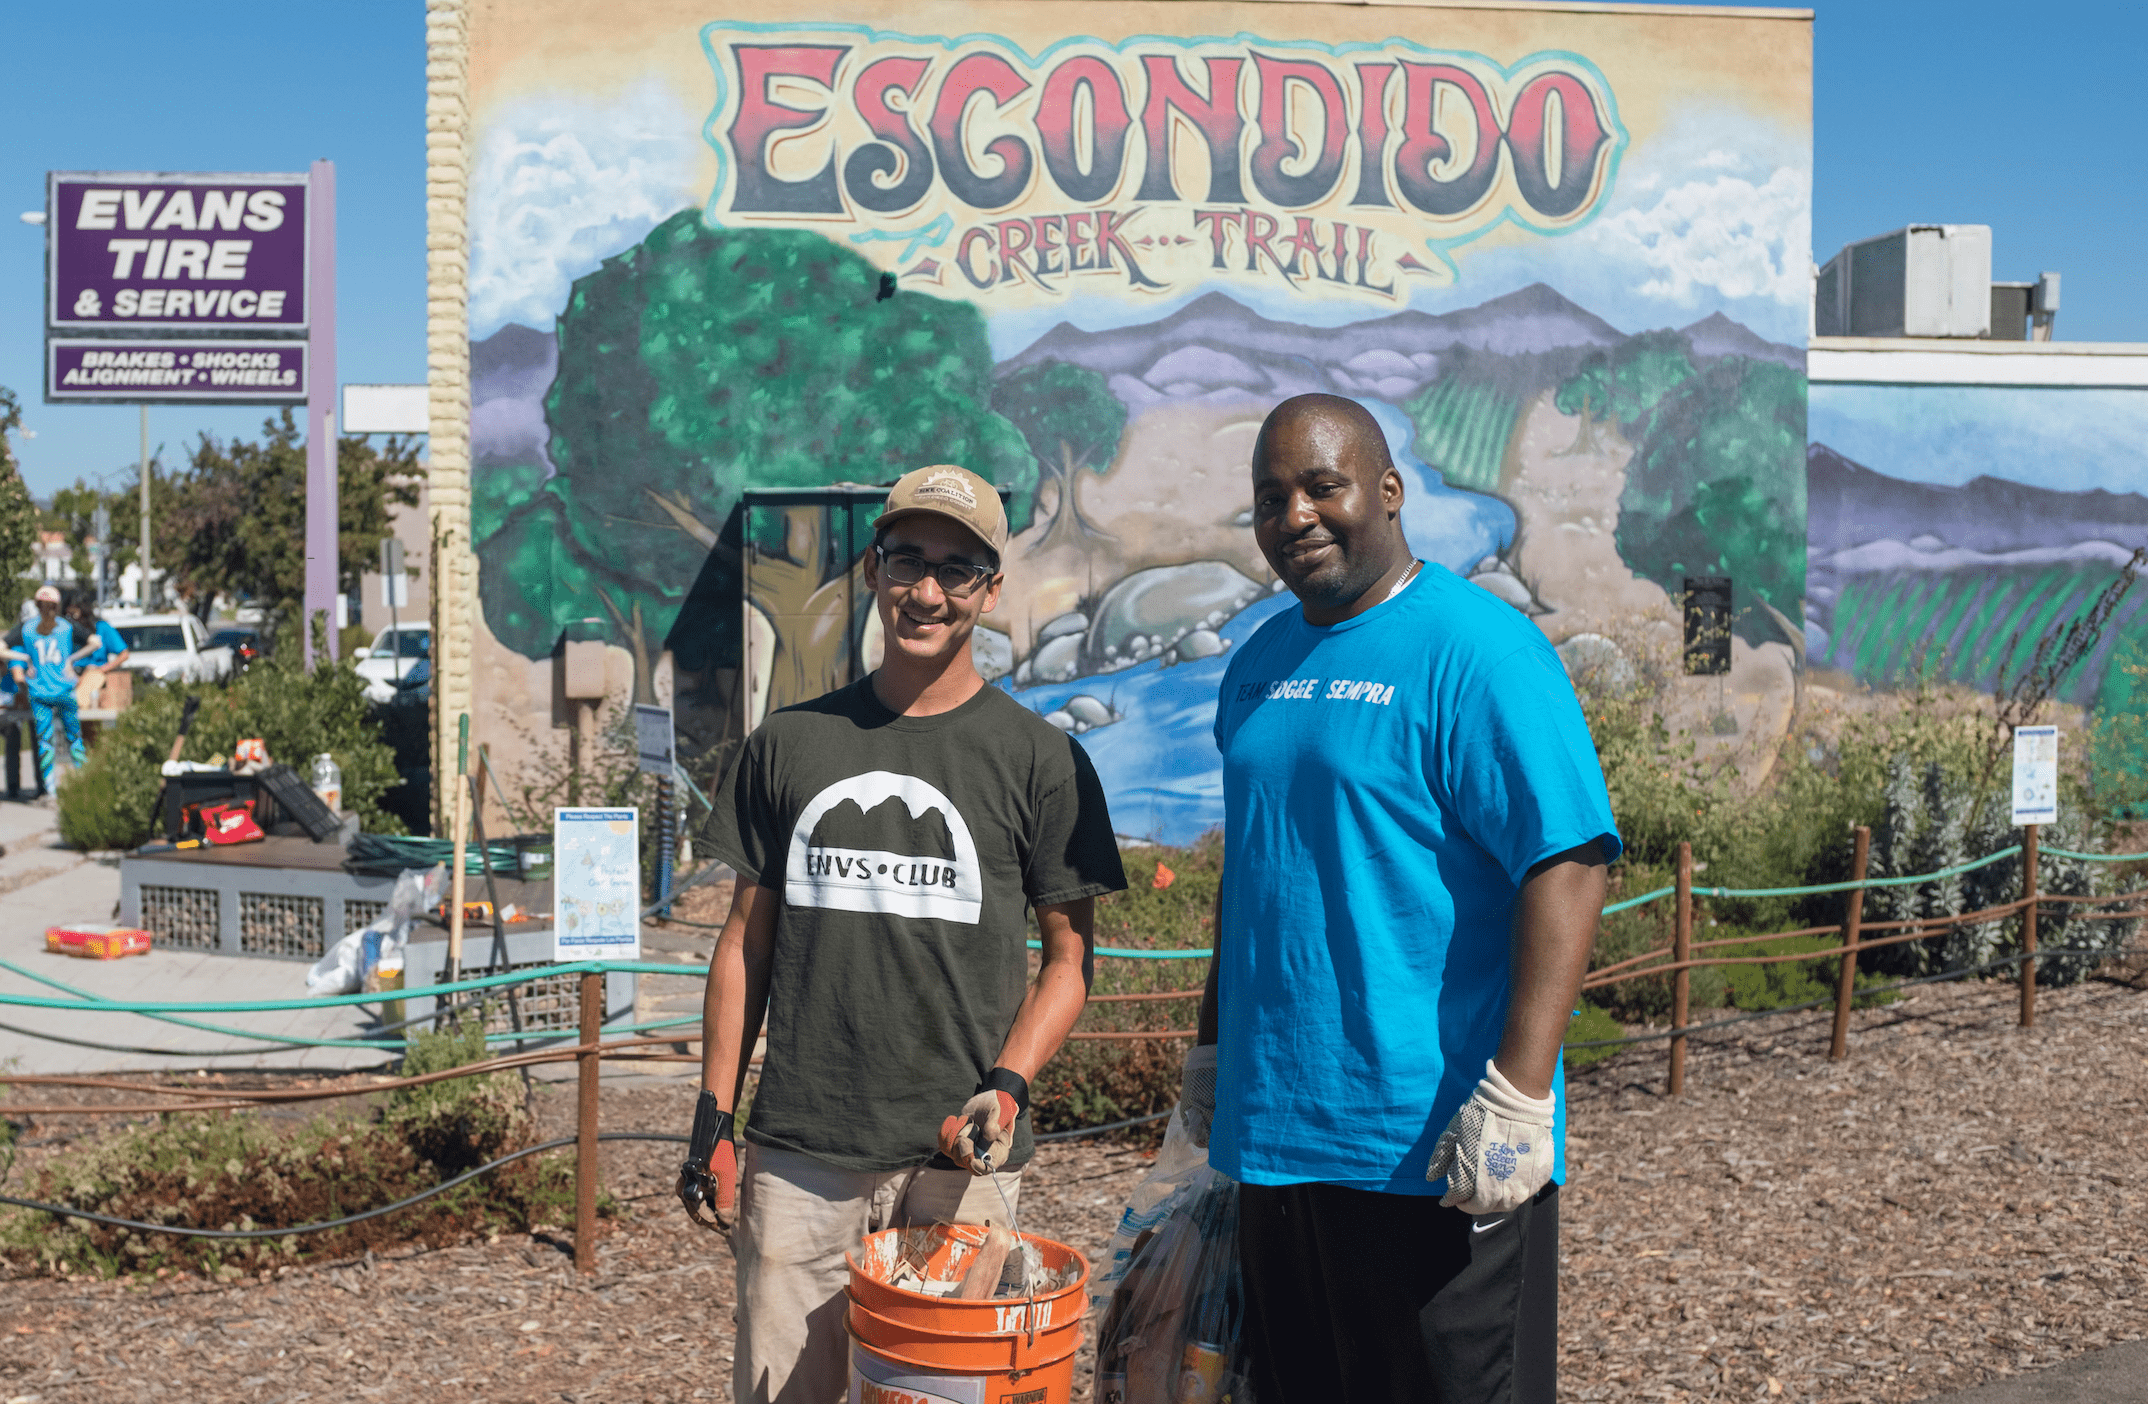 Two volunteers holding orange trash buckets pose for the camera with smiles in front of a mural of a creek passing through a forest towards a mountain range.